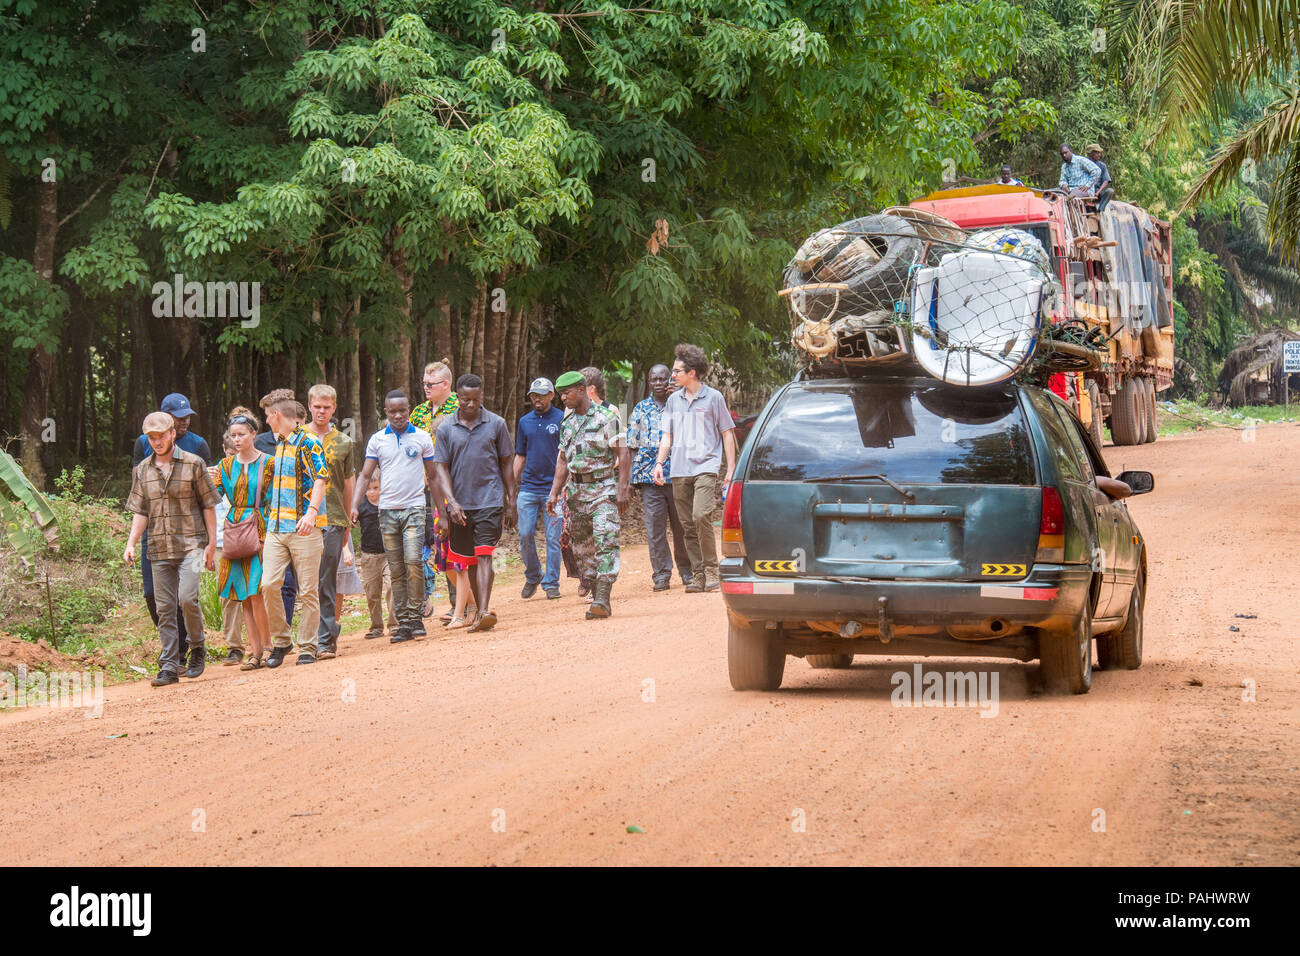 Group of students and tour guides walk together on dirt road as a car  packed with various household items drives past, Republic of Guinea Stock Photo